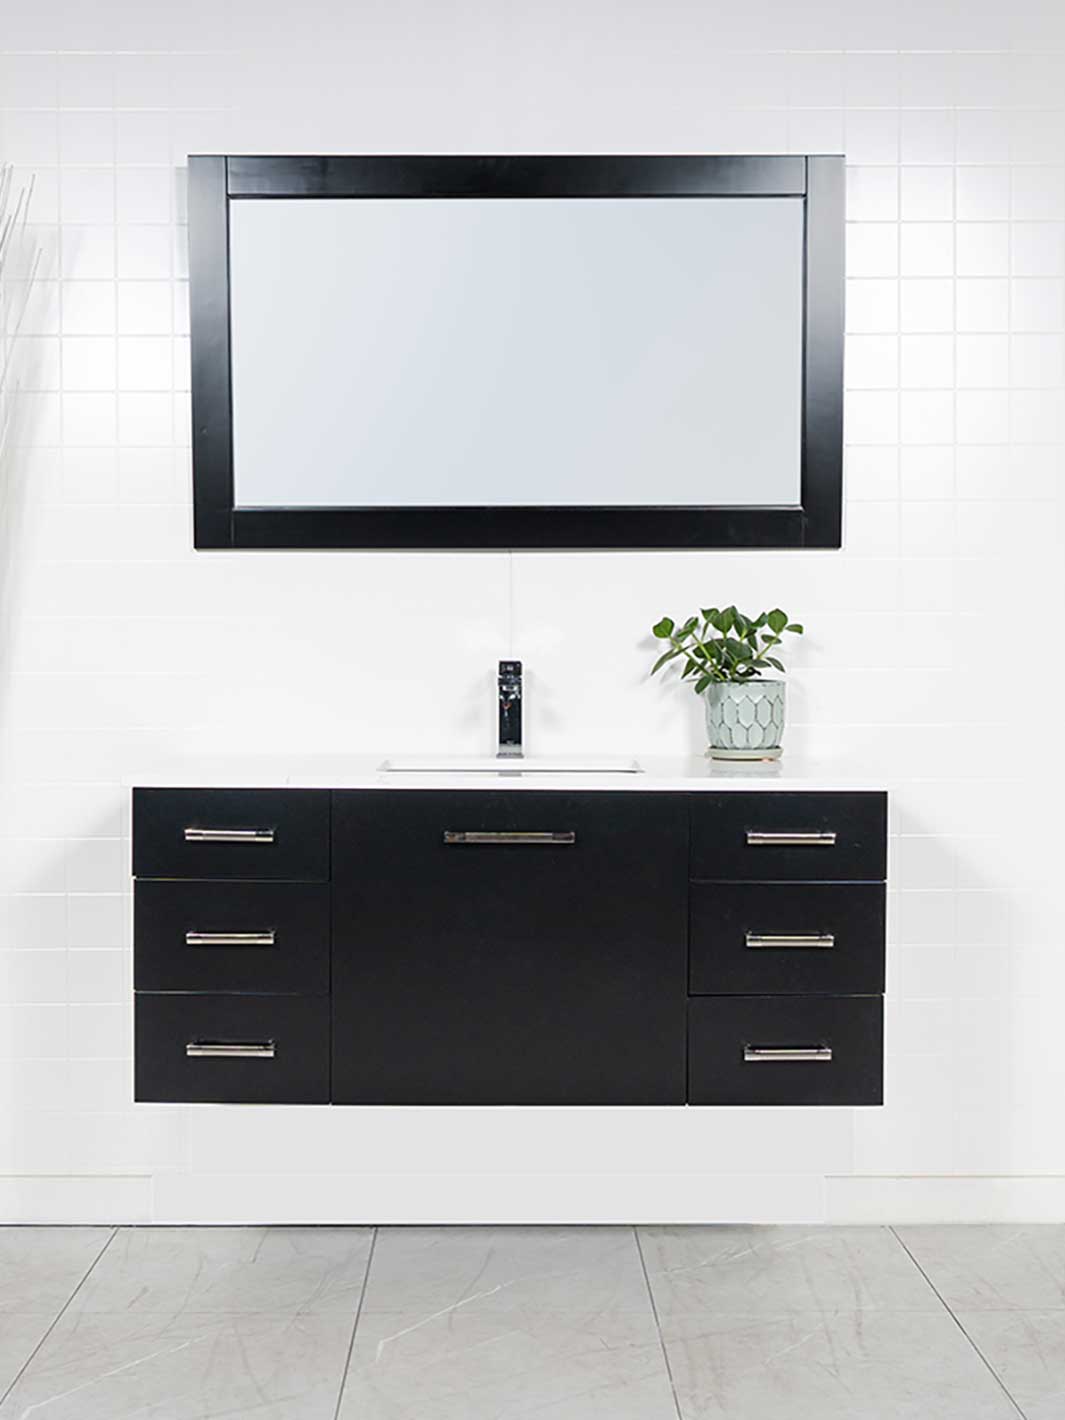 48 inch floating vanity in black with matching black wood framed mirror. white quartz counter and chrome faucet